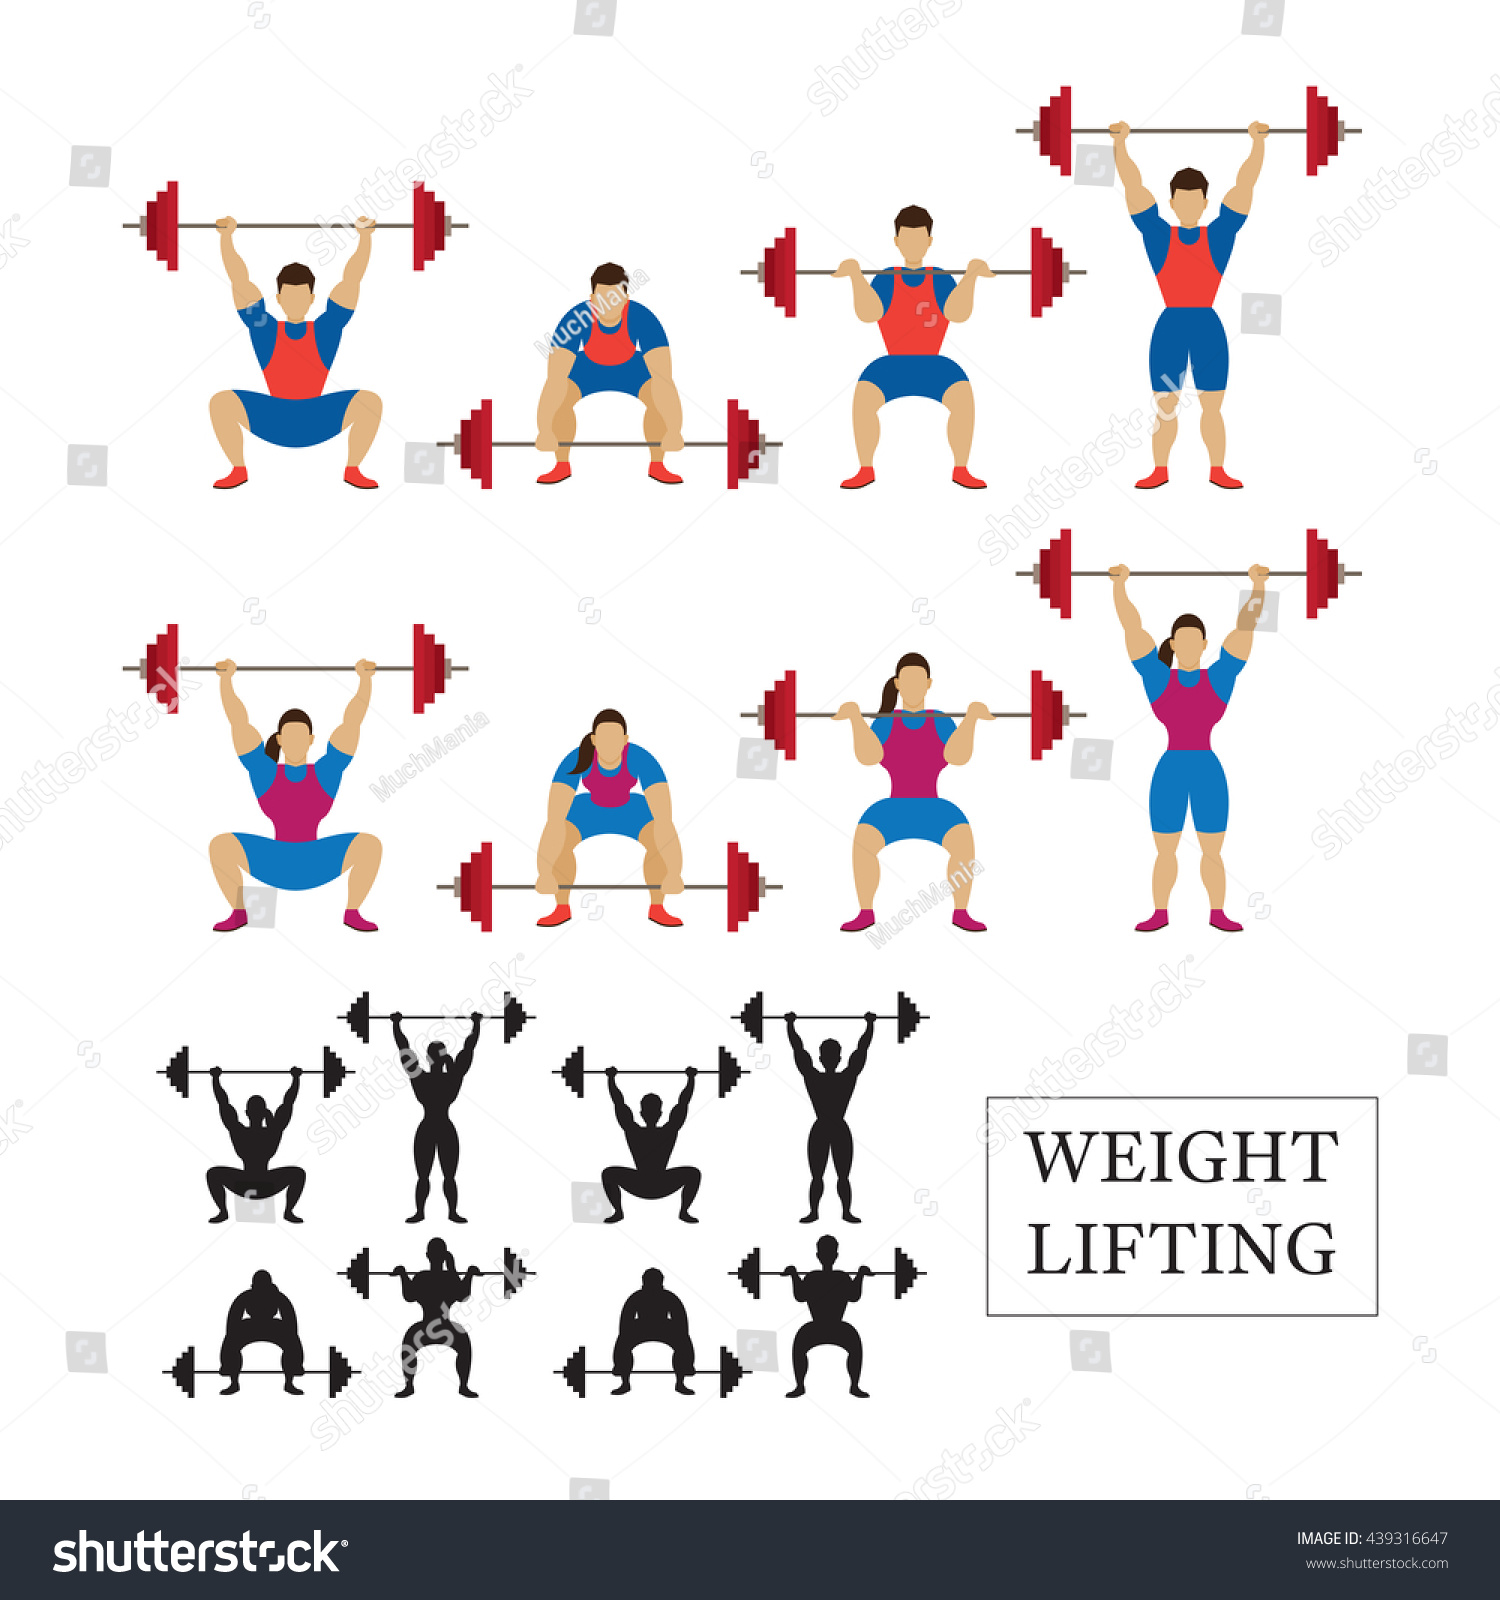 SVG of Weightlifting Athlete, Men and Women, Snatch, Clean and Jerk, Posture svg